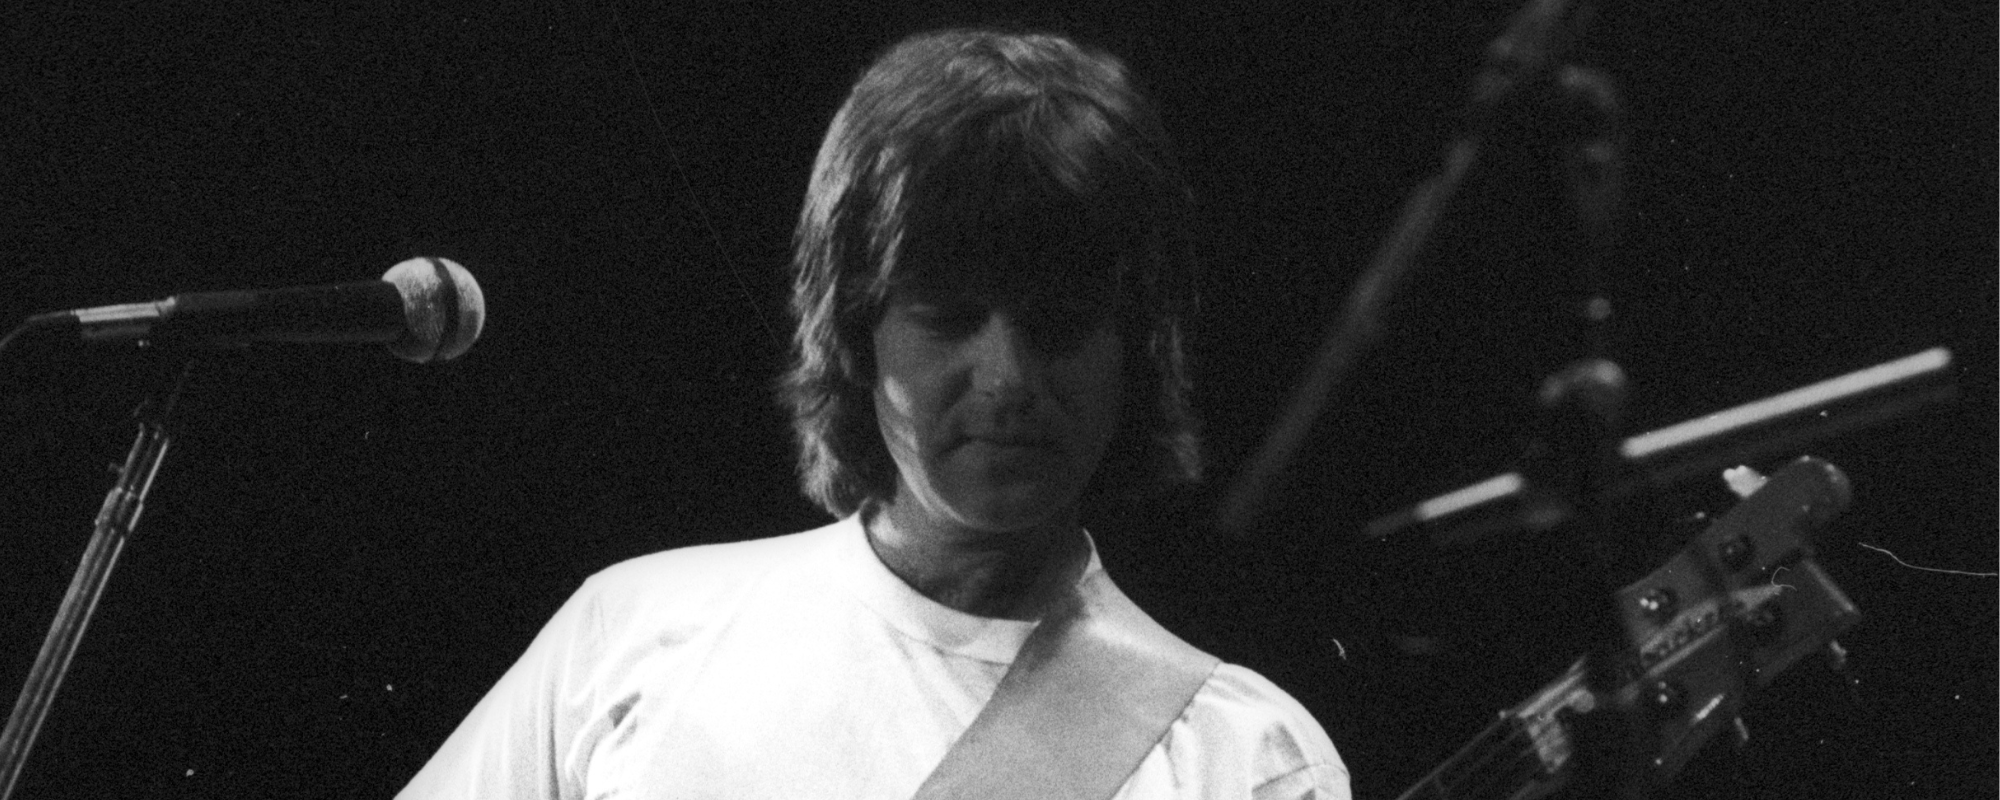 The 20 Best Randy Meisner Quotes—”When it Got to the Point of Sanity or Money, I Thought I’d Rather Have Sanity.”